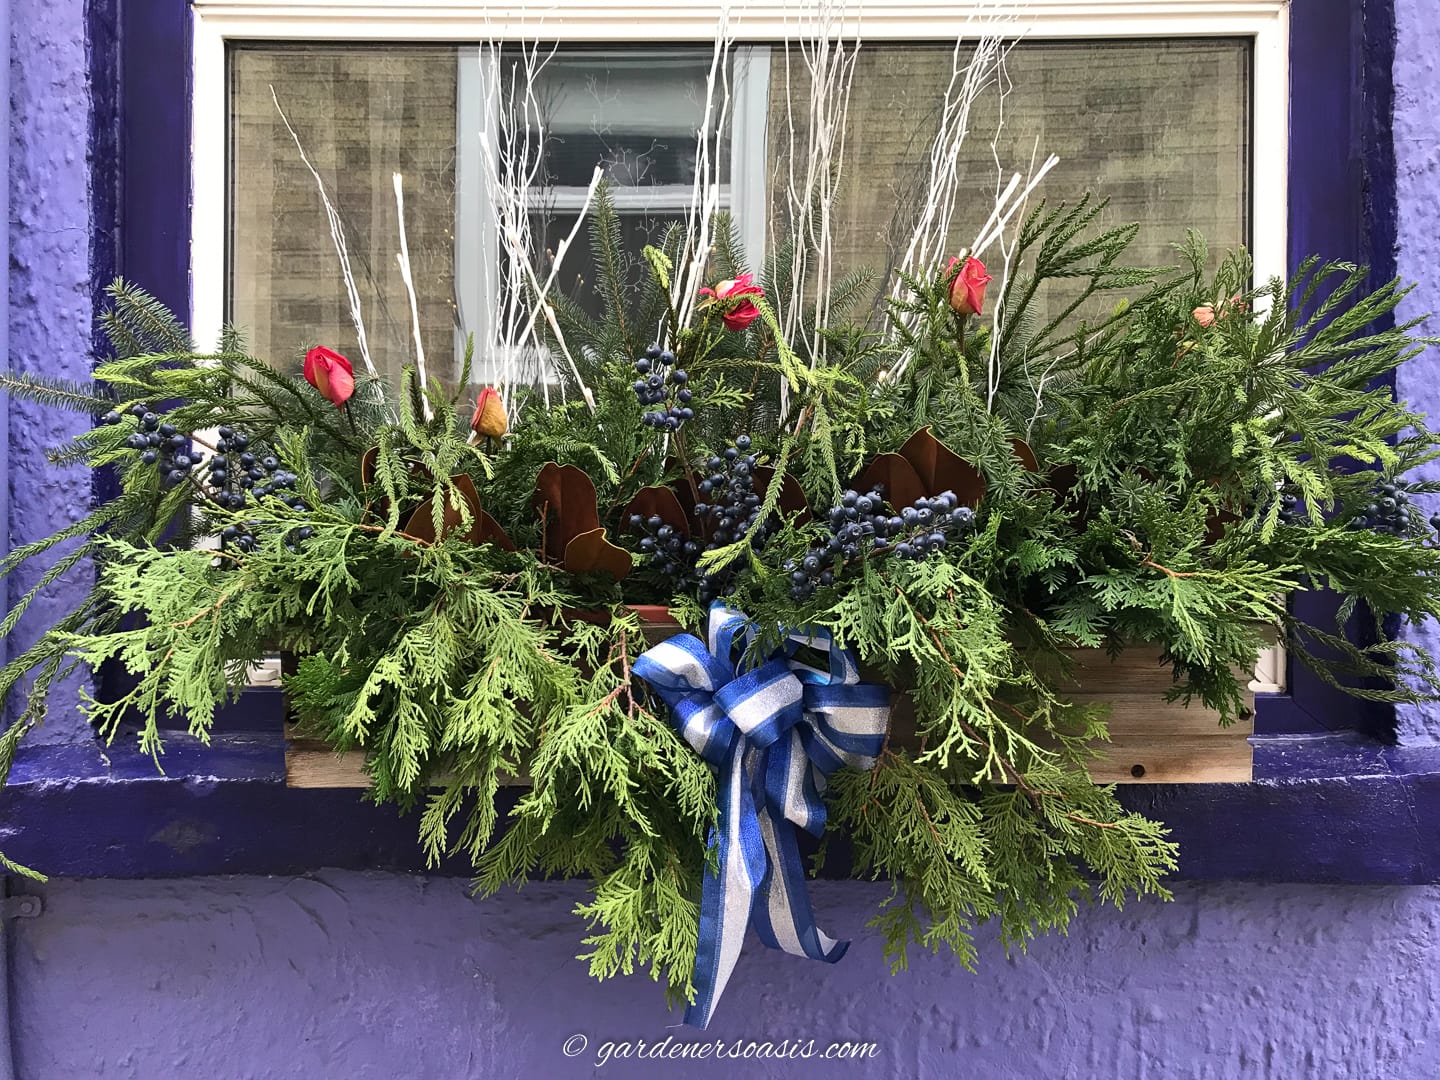 A winter window box decorated with evergreens, berries and a blue ribbon.